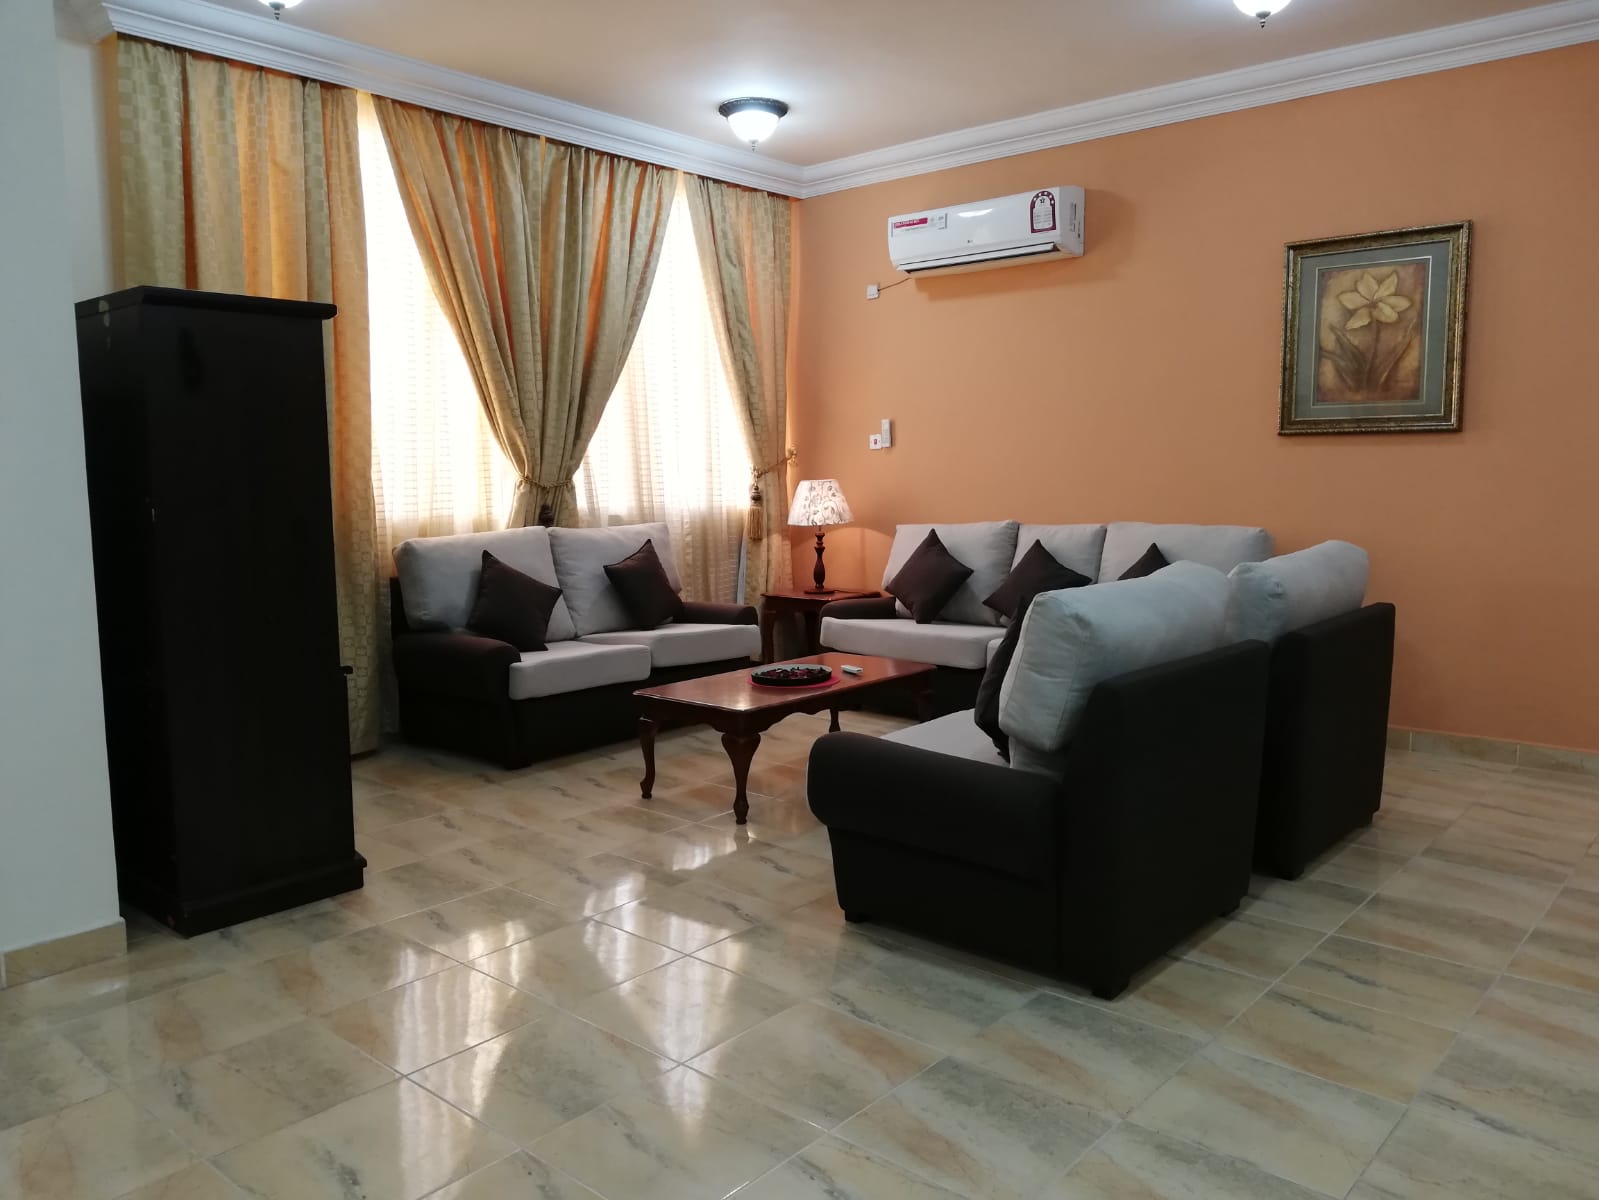 3 bedrooms furnished compound apartments in Z-8